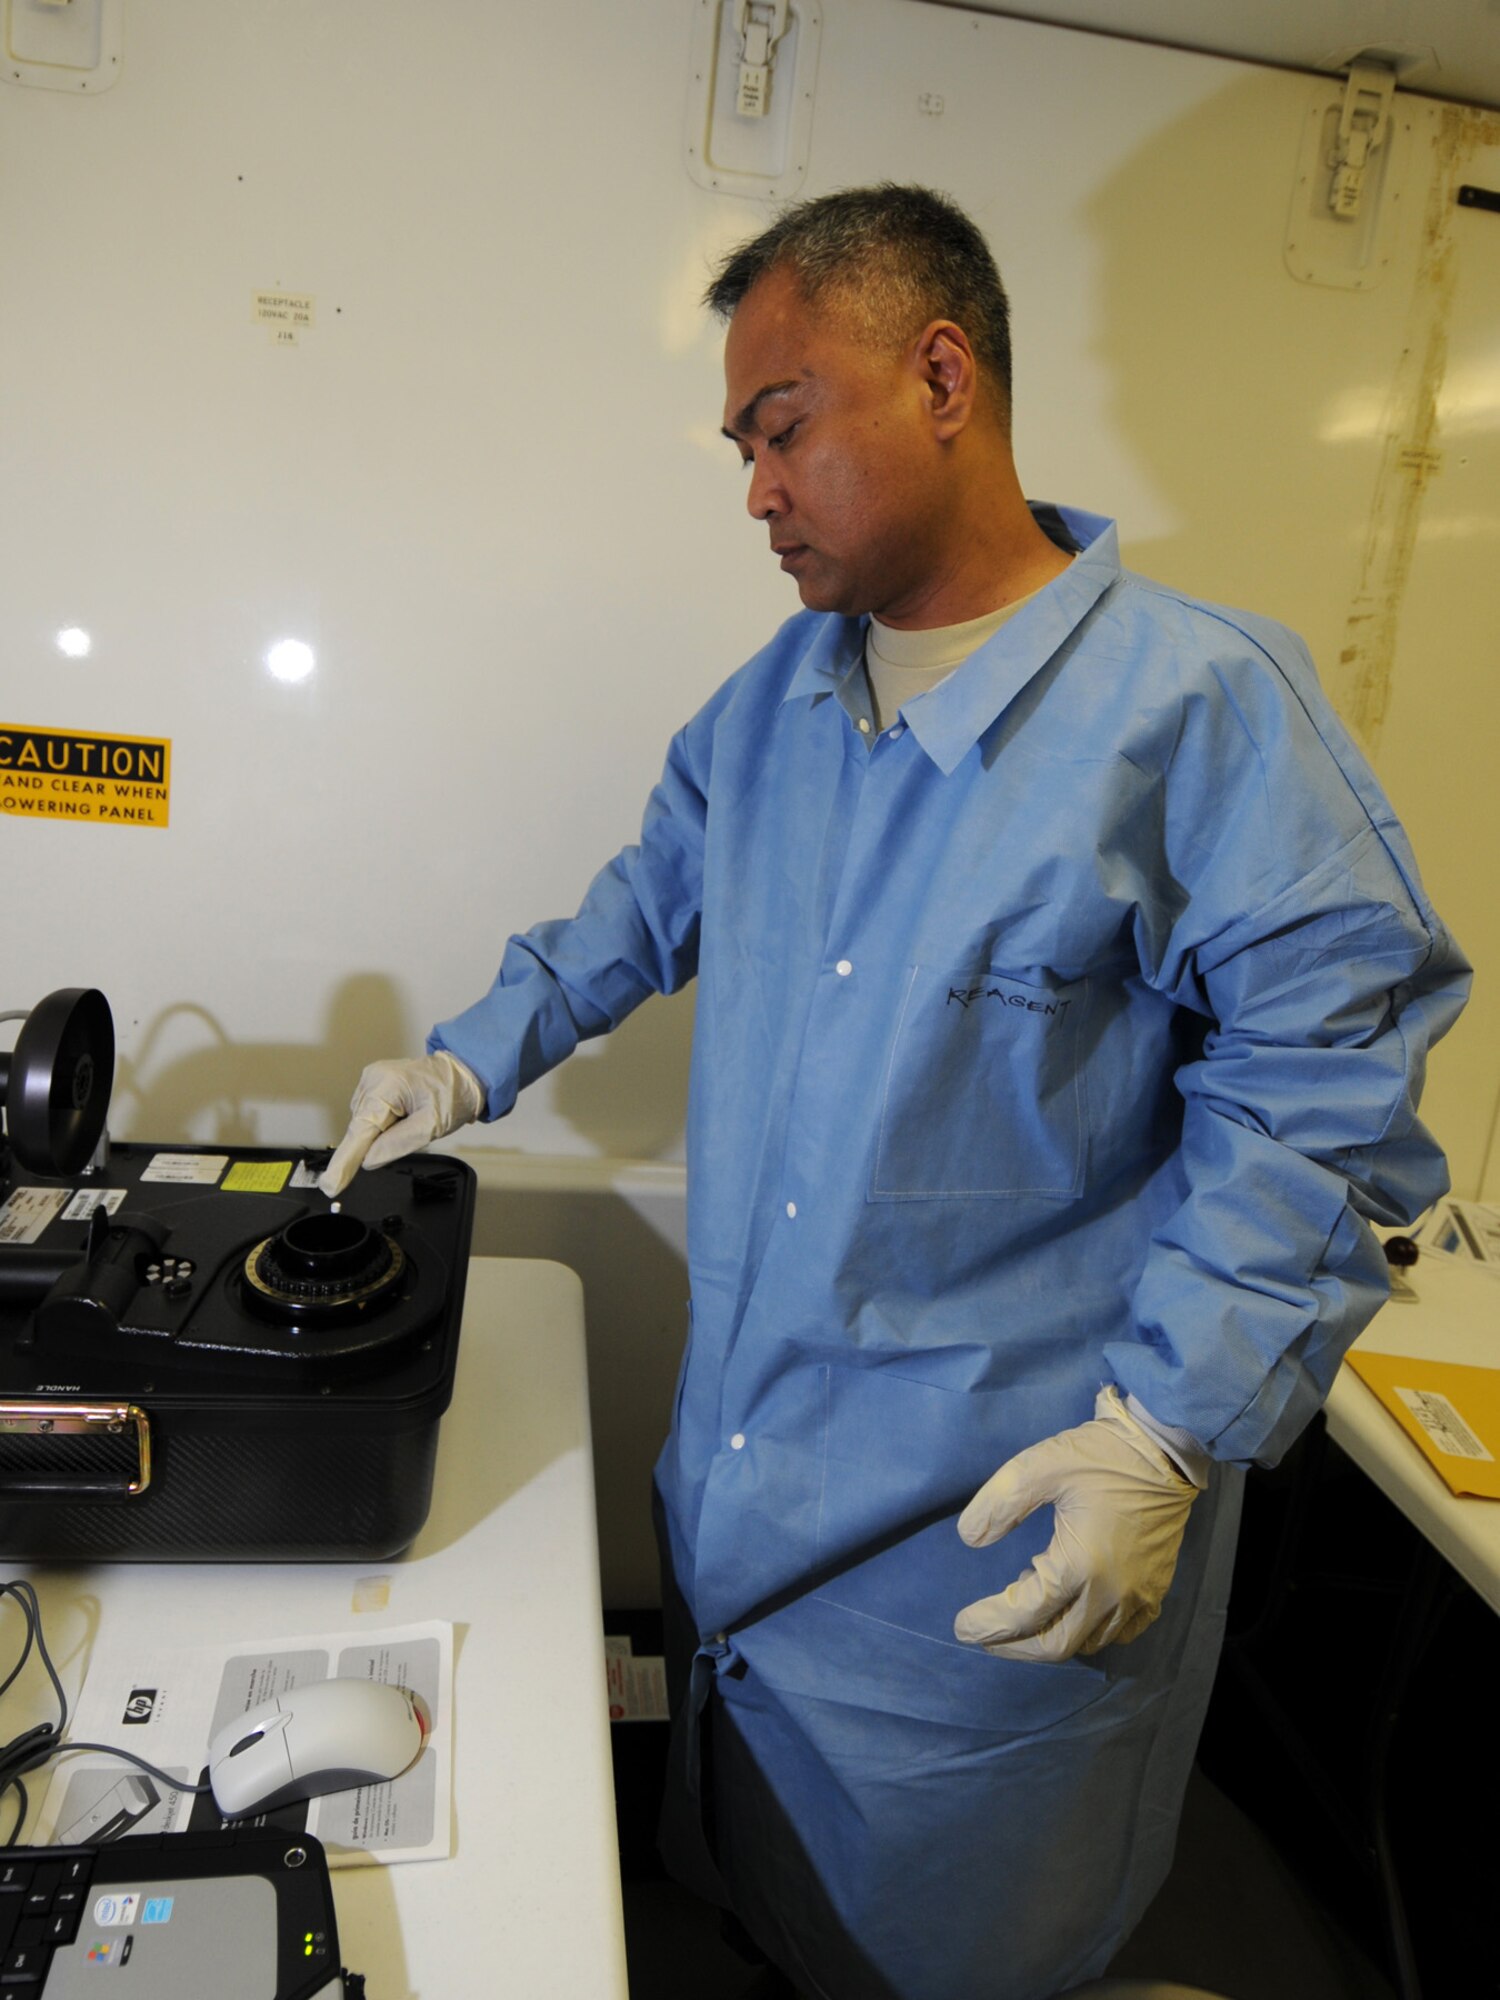 U.S. Air Force Maj. Lorenzo Gabiola, 379th Expeditionary Medical Group biological augmentation team chief, analyzes a sample, Oct. 13, 2009, using the base's new Joint Biological Agent Identification and Diagnostic System, which amplifies ribonucleic acid for H1N1 detection. Members of the 379 EMDG BAT team are the first Air Force personnel certified in detecting H1N1 using this technology. Major Gabiola is deployed from Tinker Air Force Base, Okla. in support of operations Iraqi Freedom and Enduring Freedom. (U.S. Air Force Photo/Tech Sgt. Jason W. Edwards)